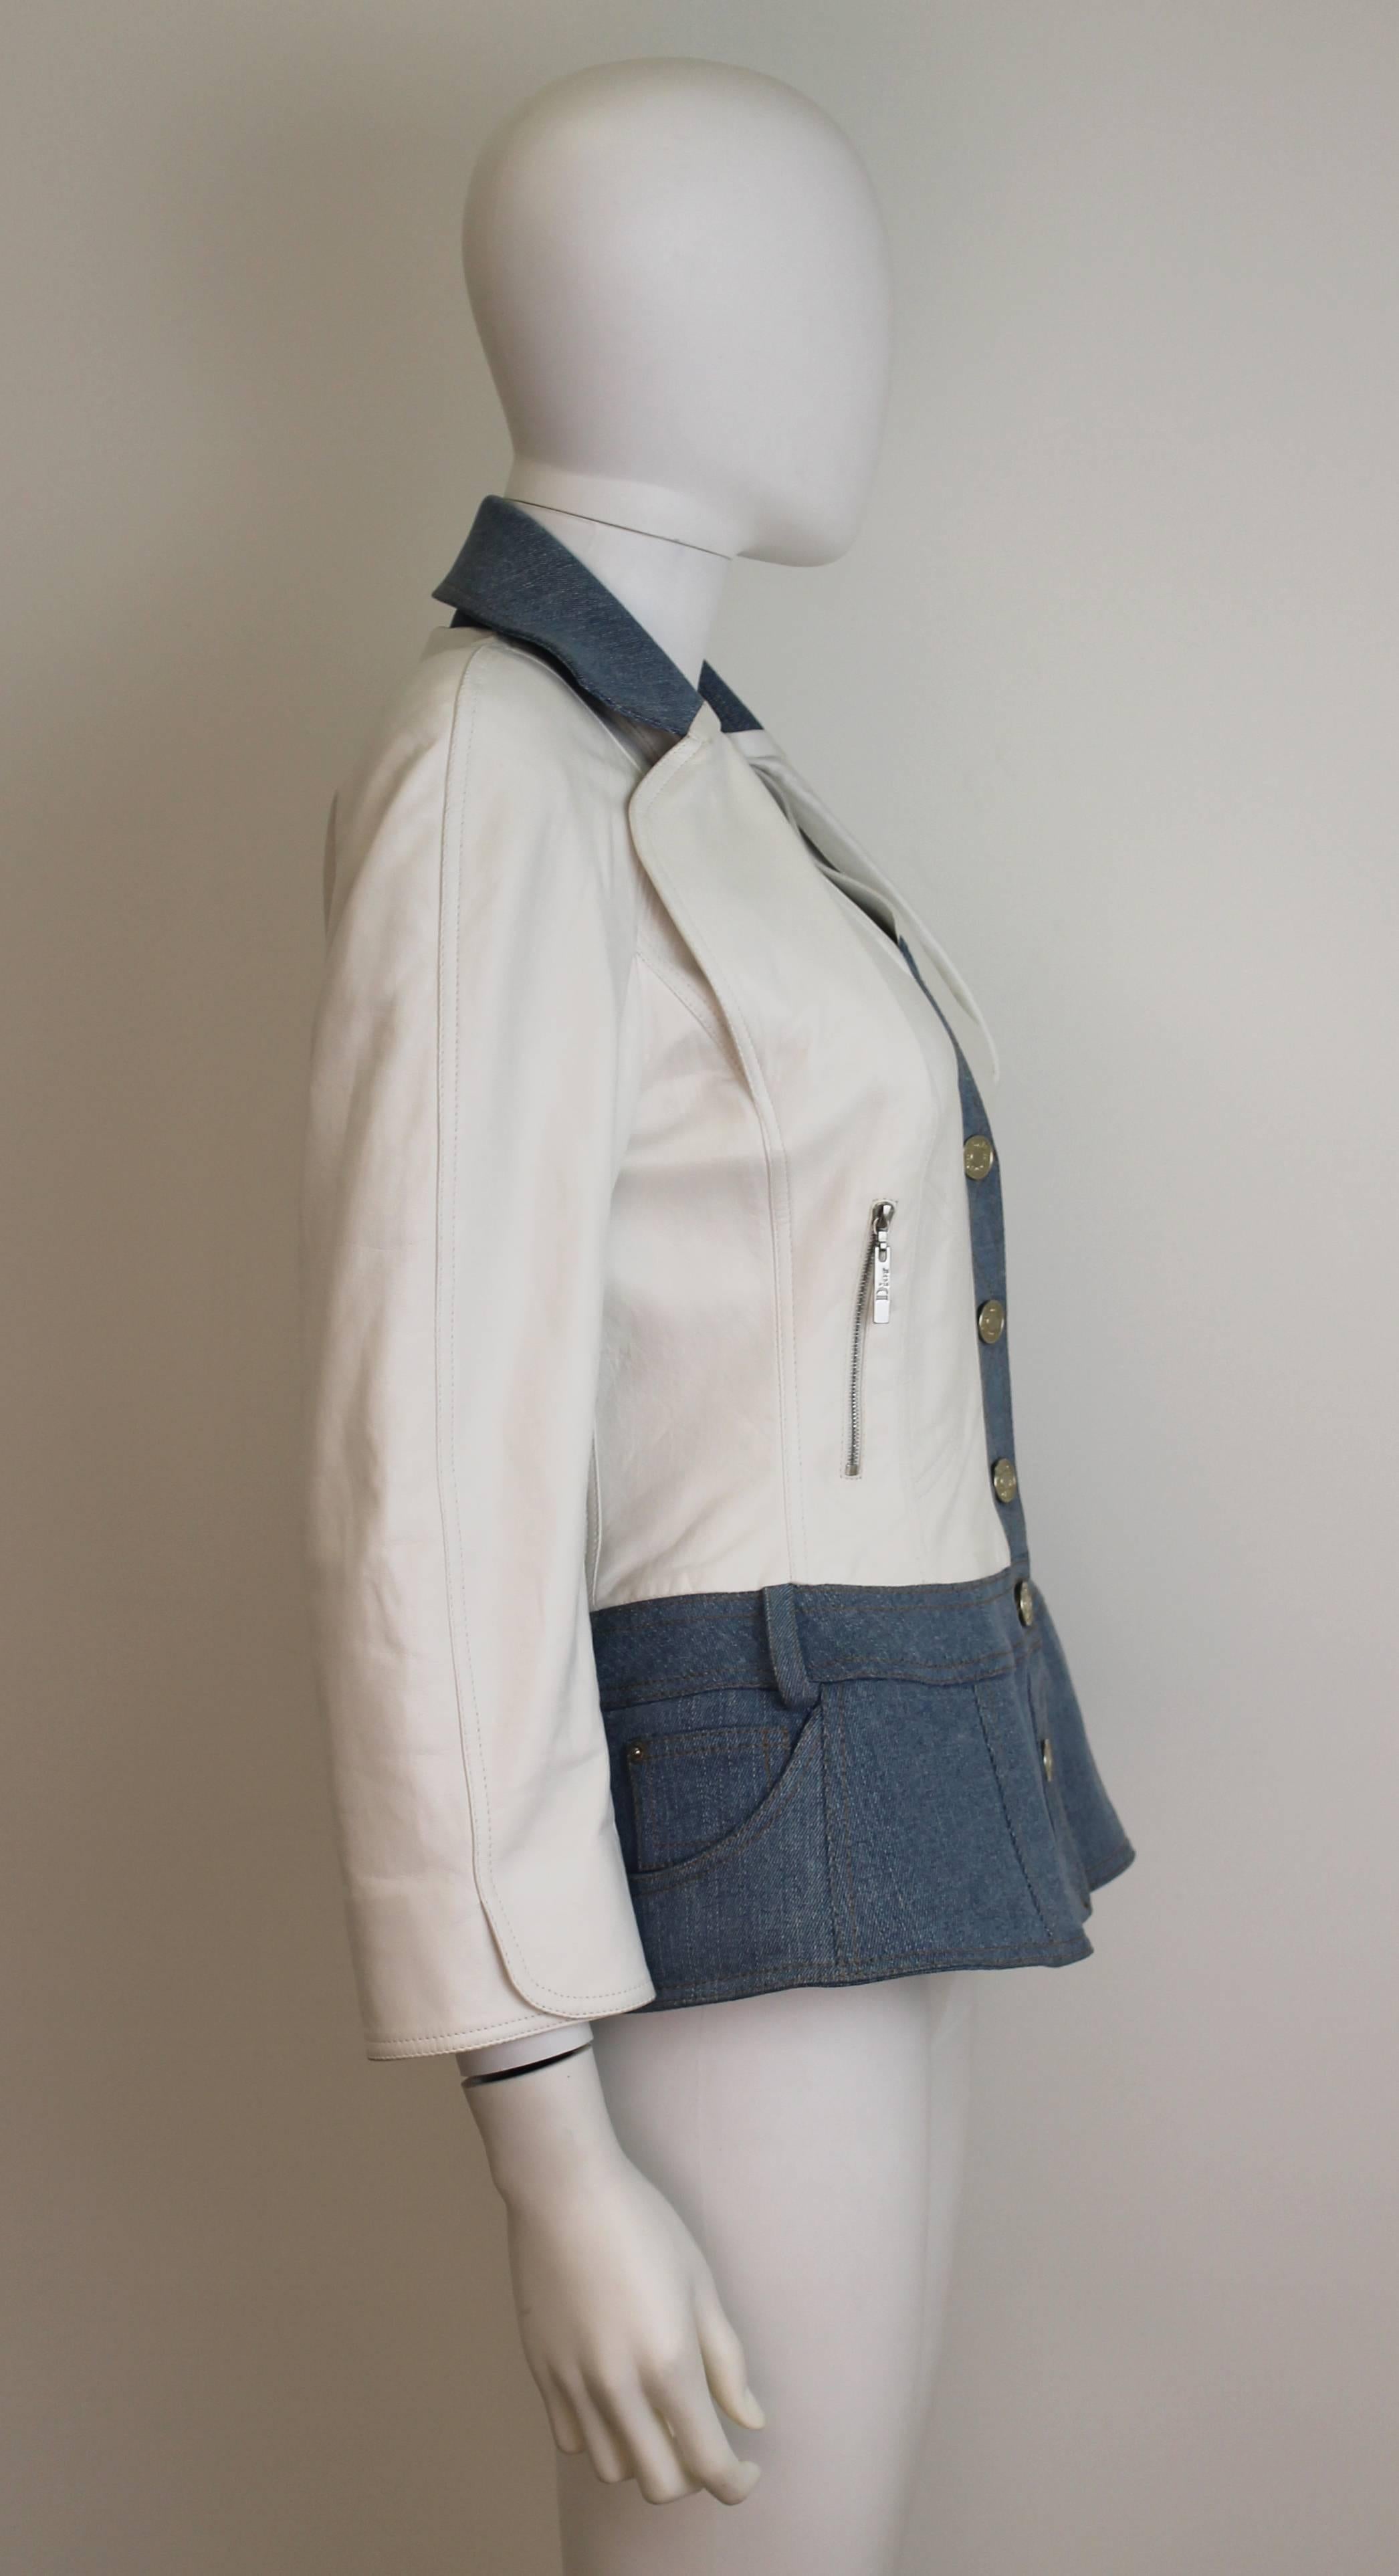 Christian Dior white leather jacket from SS 2005 collection. Features denim padded peplum, small shoulder pads and 